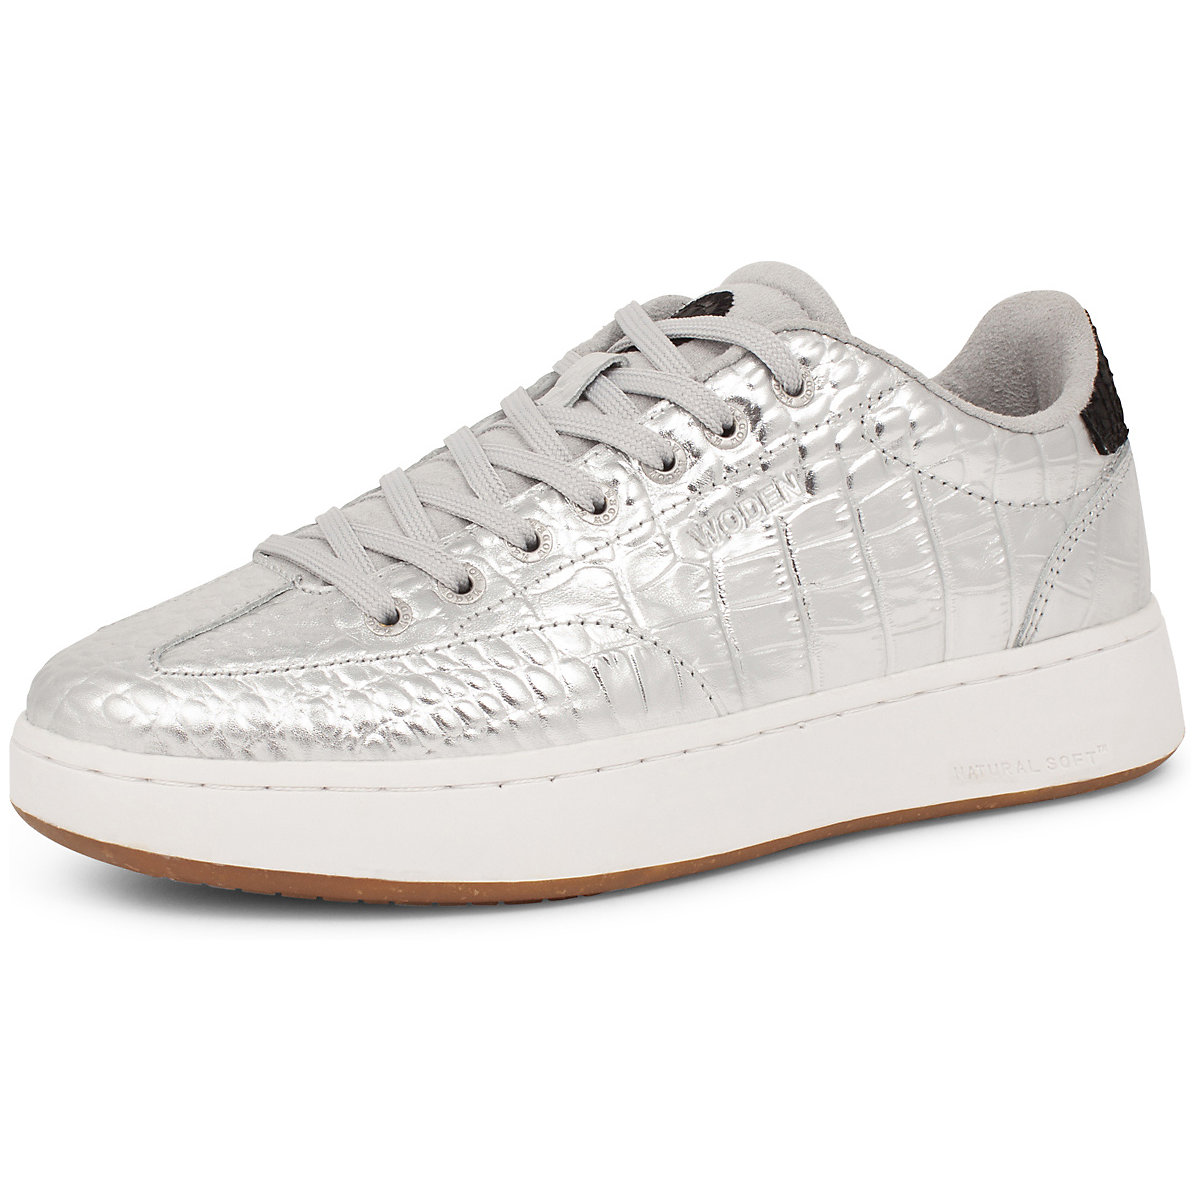 WODEN Sneakers Pernille Croco Shiny Sneakers Low silber